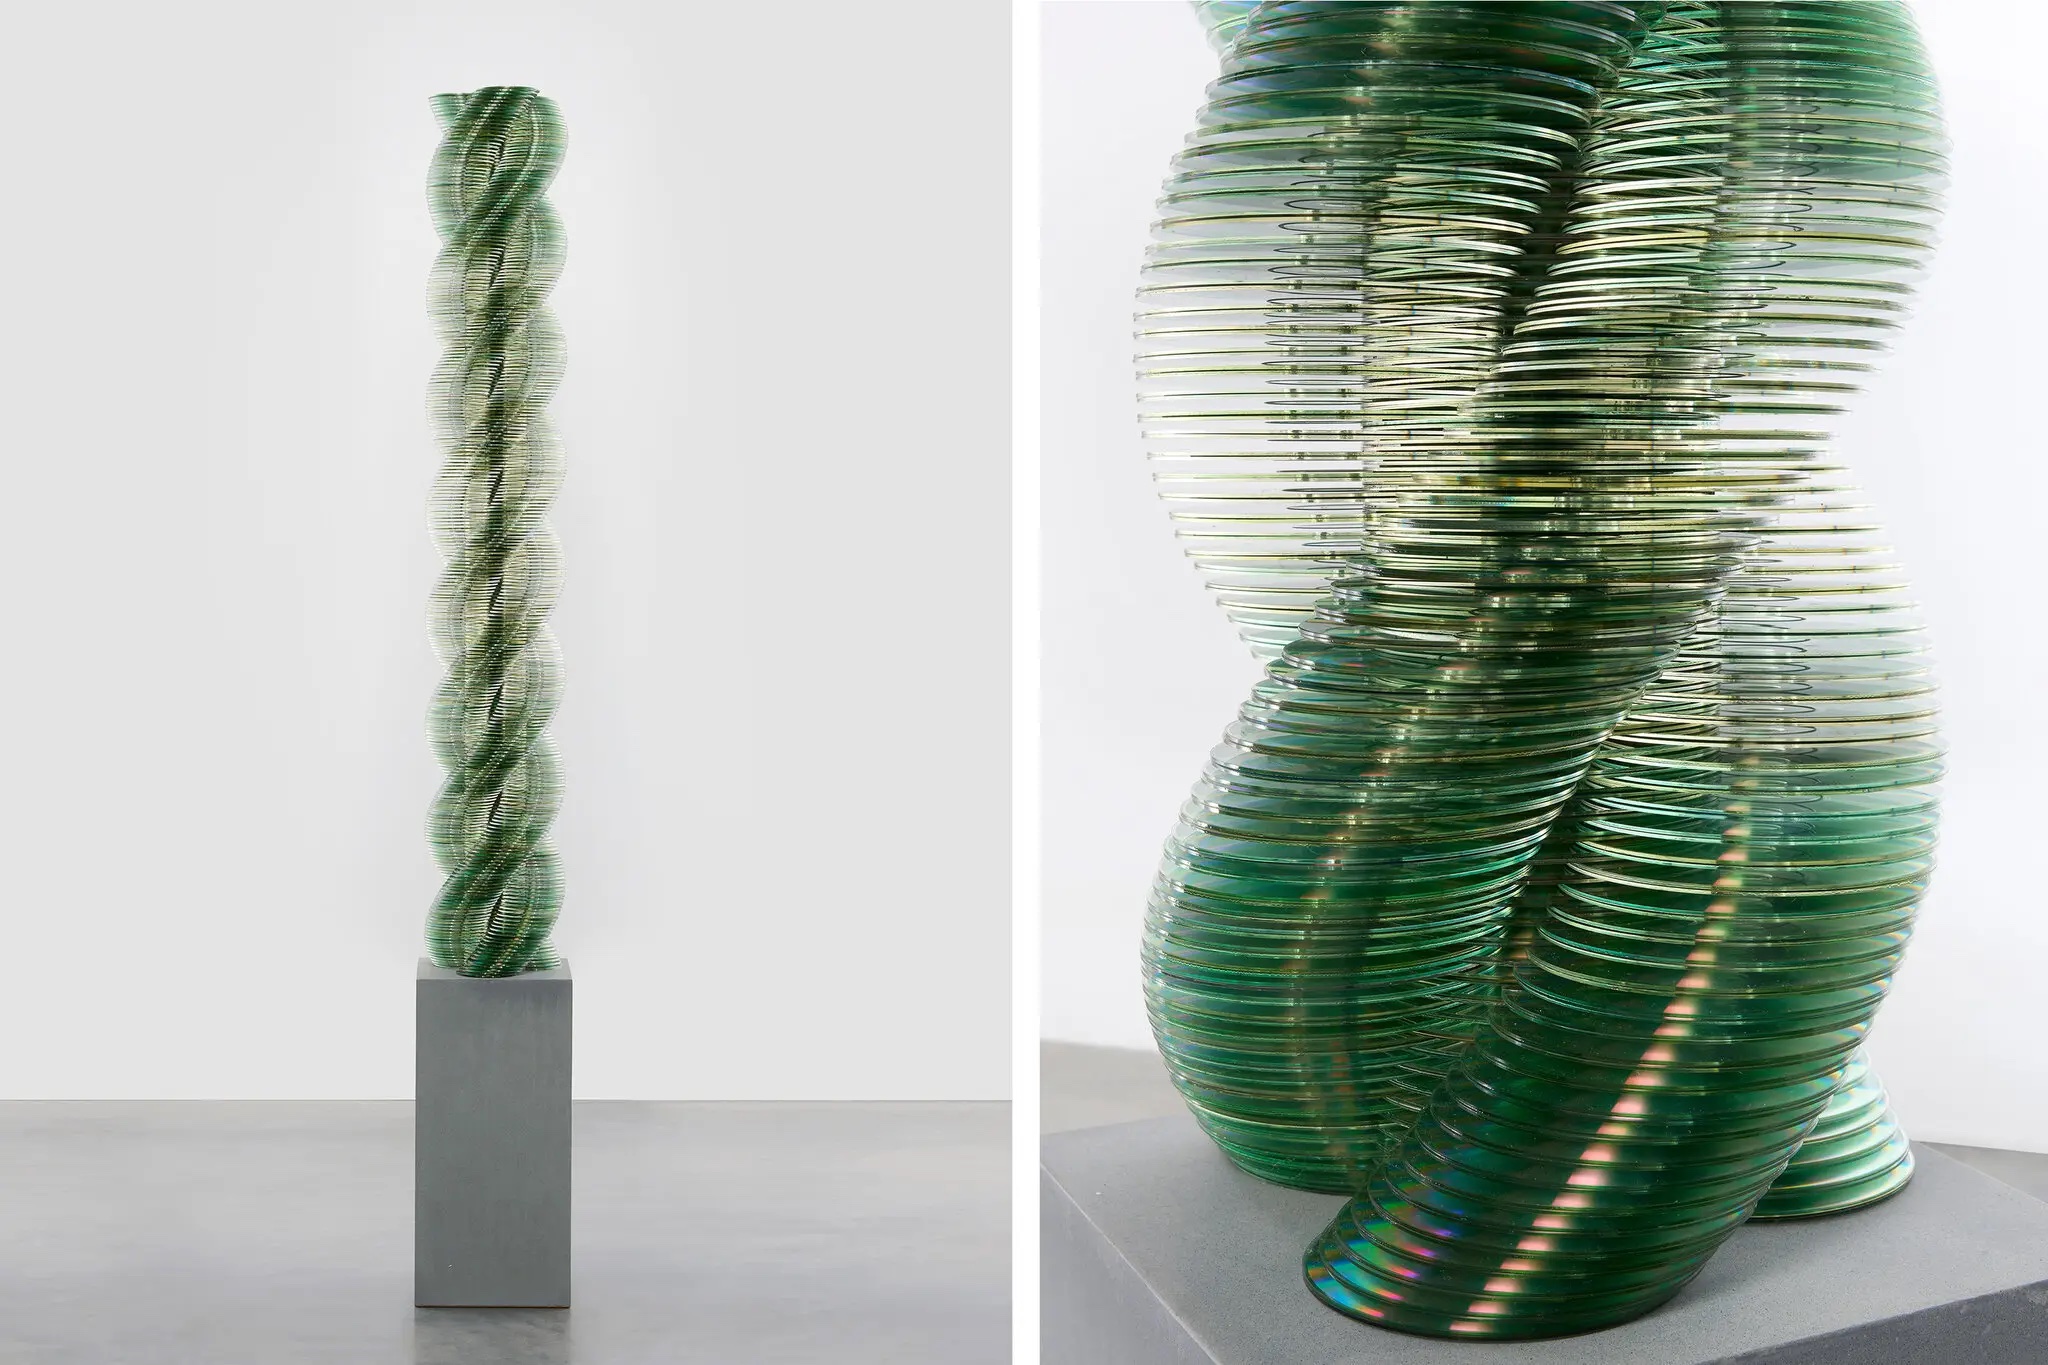 See This: Spiraling Sculptures Made Out of Recycled CDs